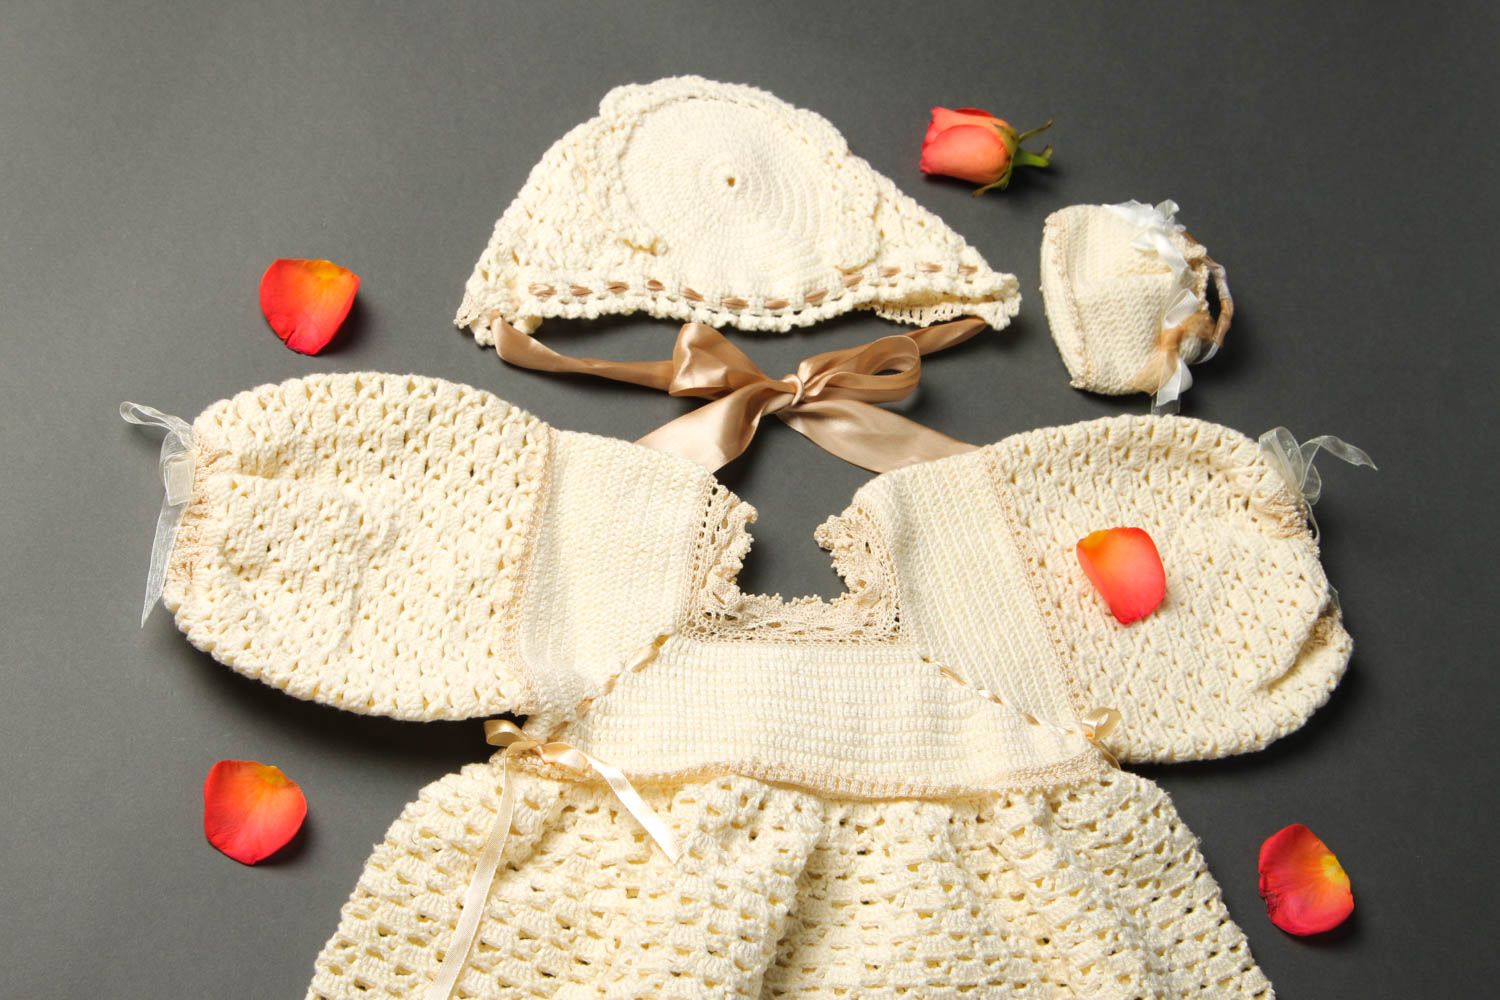 Handmade christening dresses baby baptism outfit baby accessories gift ideas photo 1